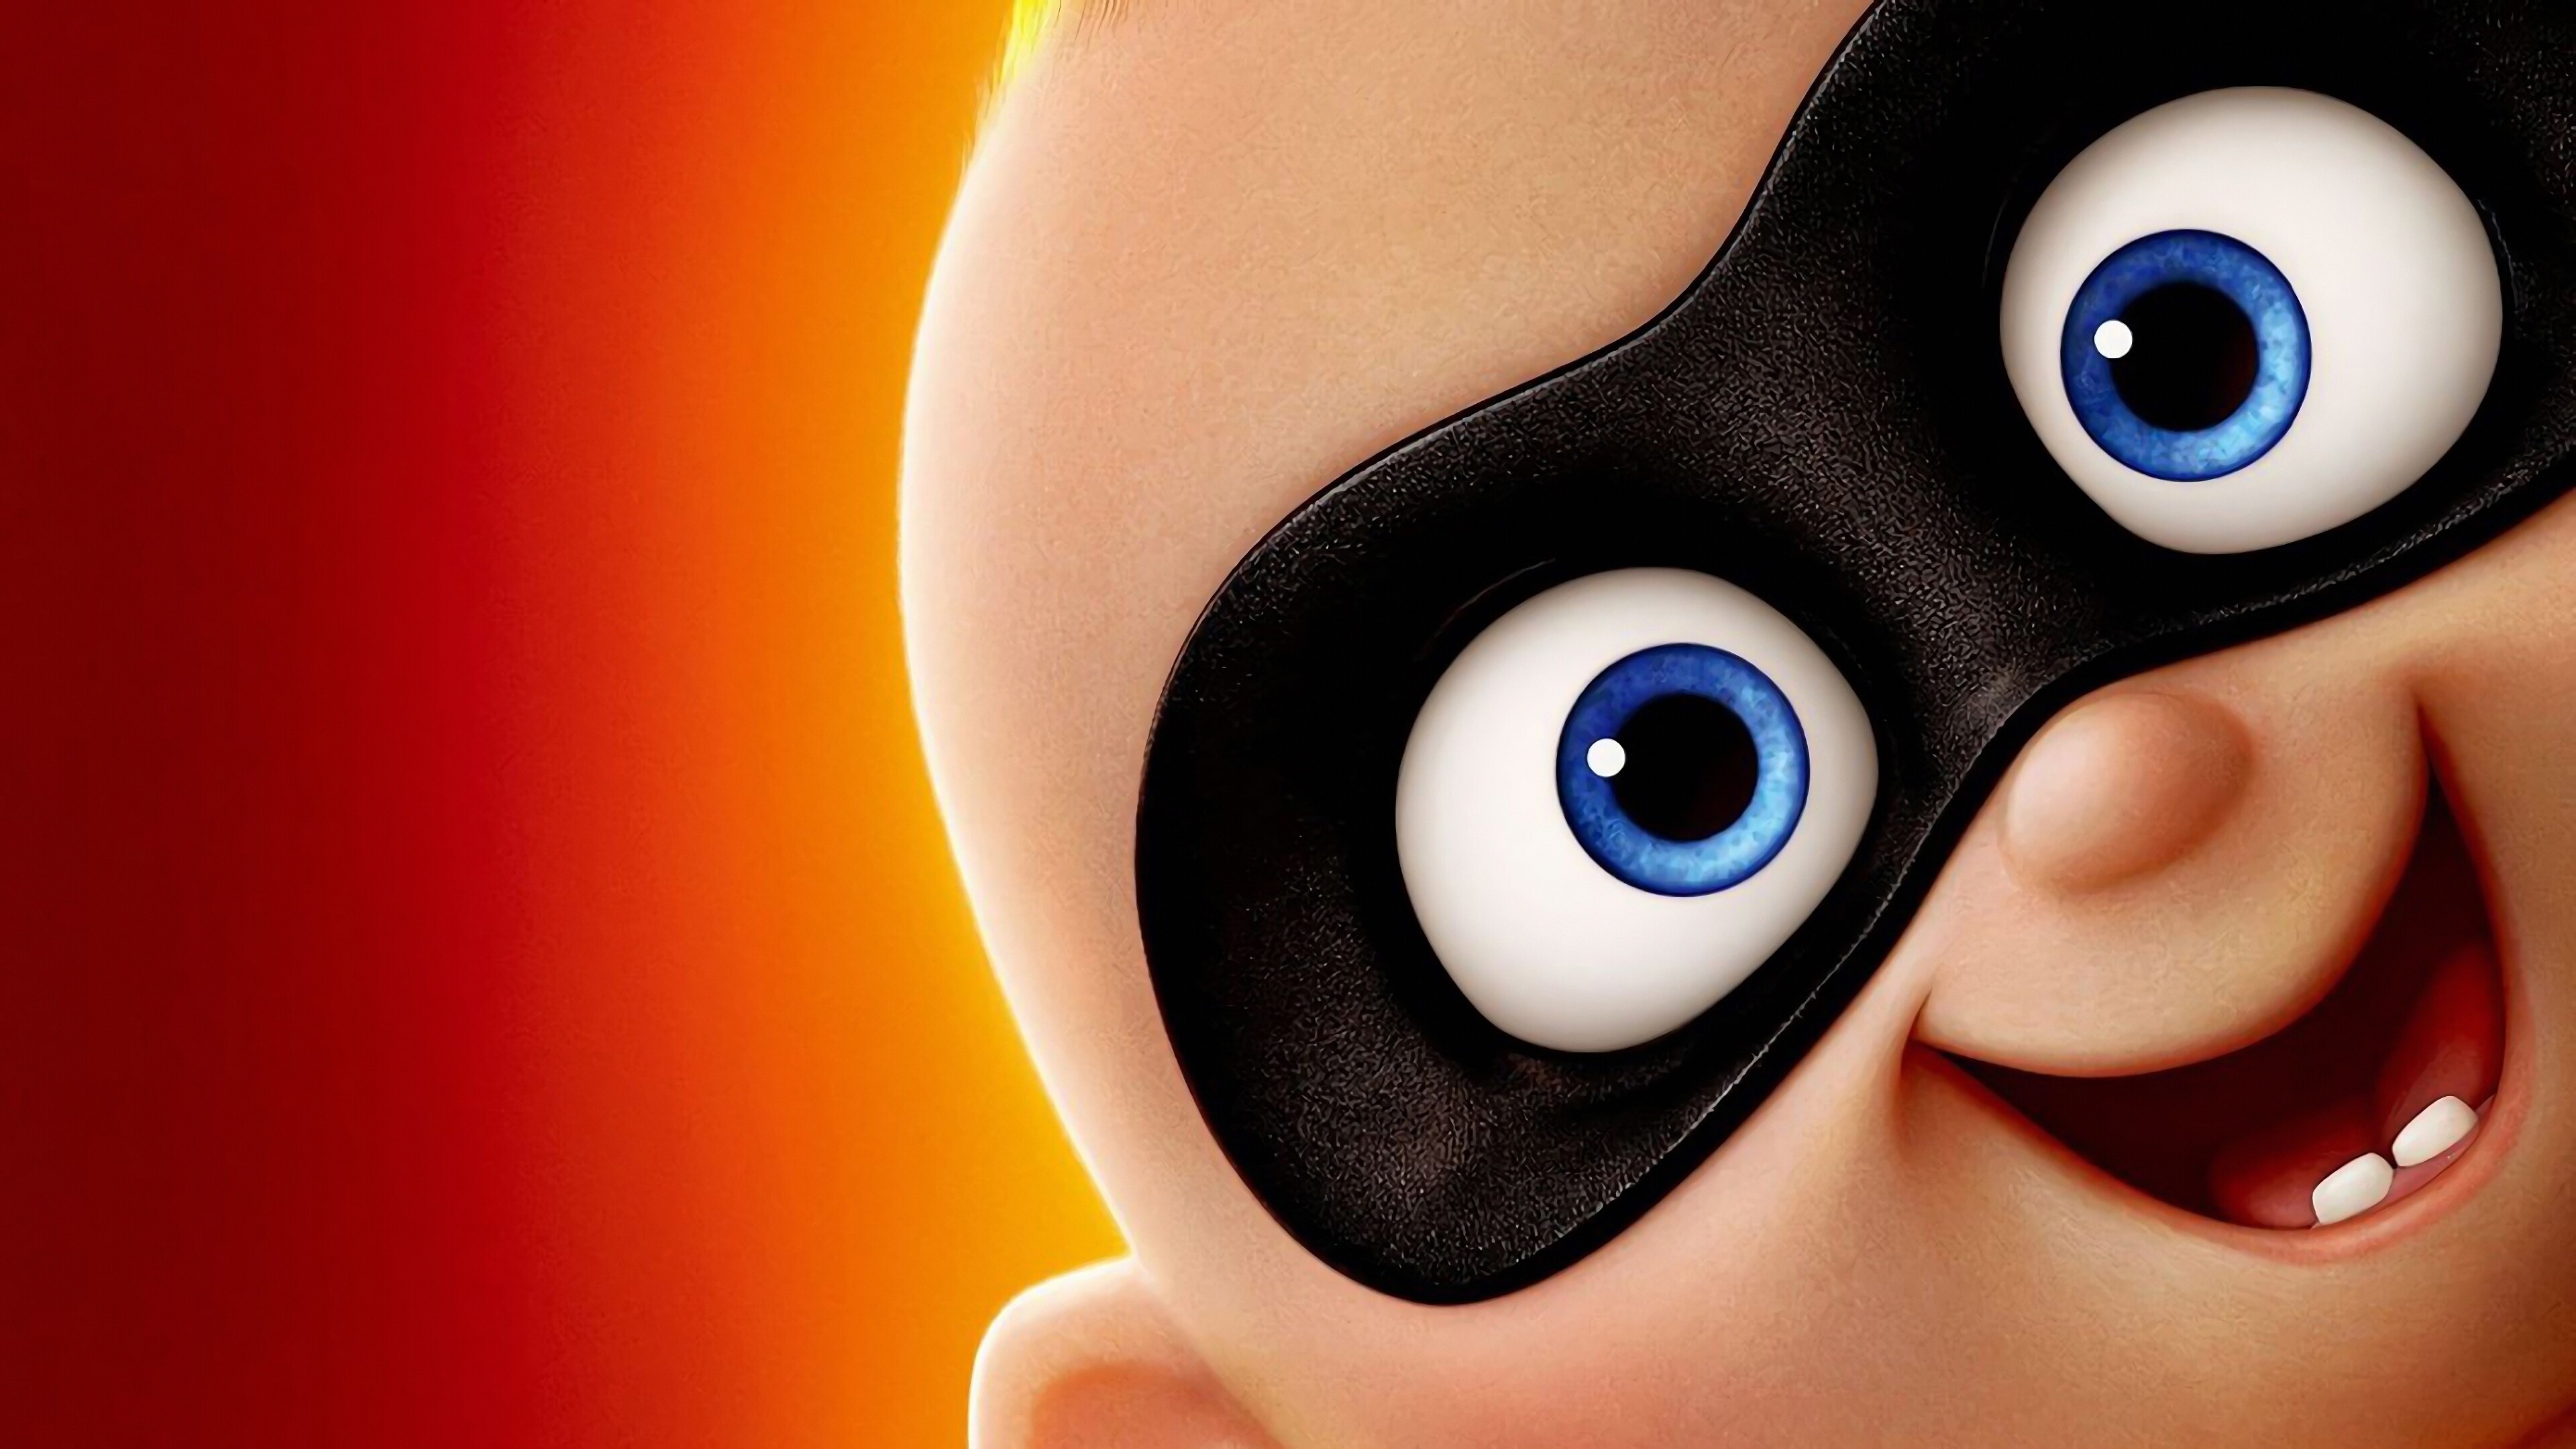 The Incredibles: Eli Fucile and Maeve Andrews as Jack-Jack Parr, the Parrs' infant son who demonstrates a wide range of superhuman abilities. 3840x2160 4K Wallpaper.